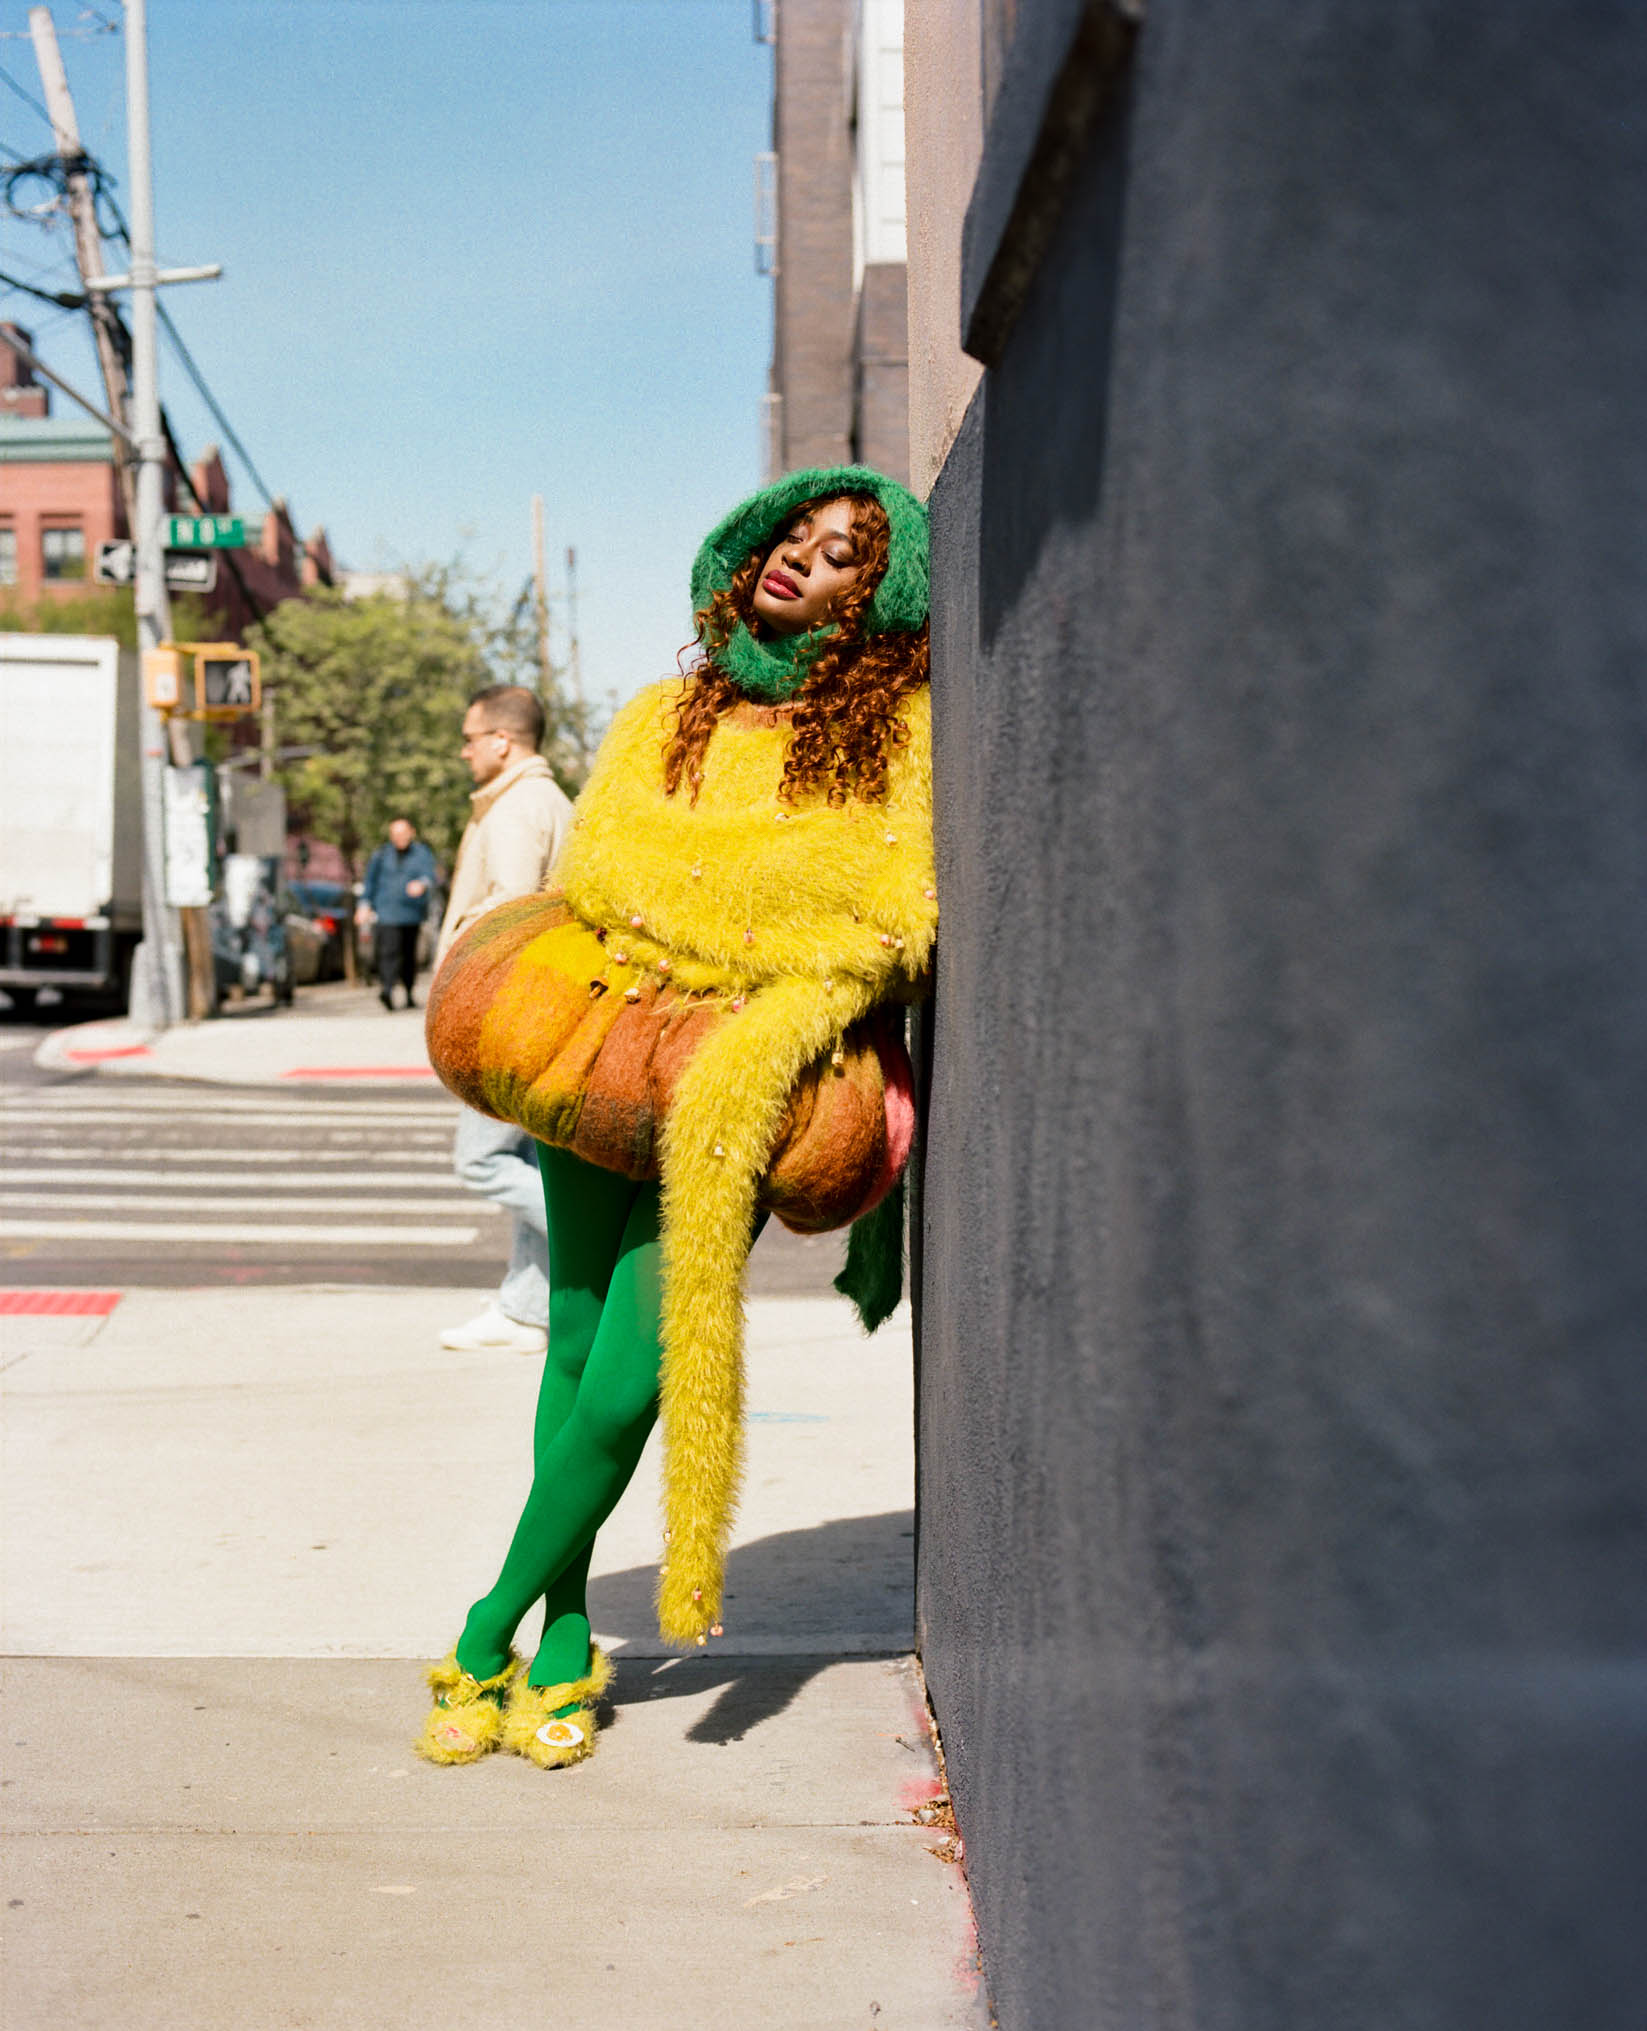 kari faux posing on a street corner in a fuzzy green and yellow costume